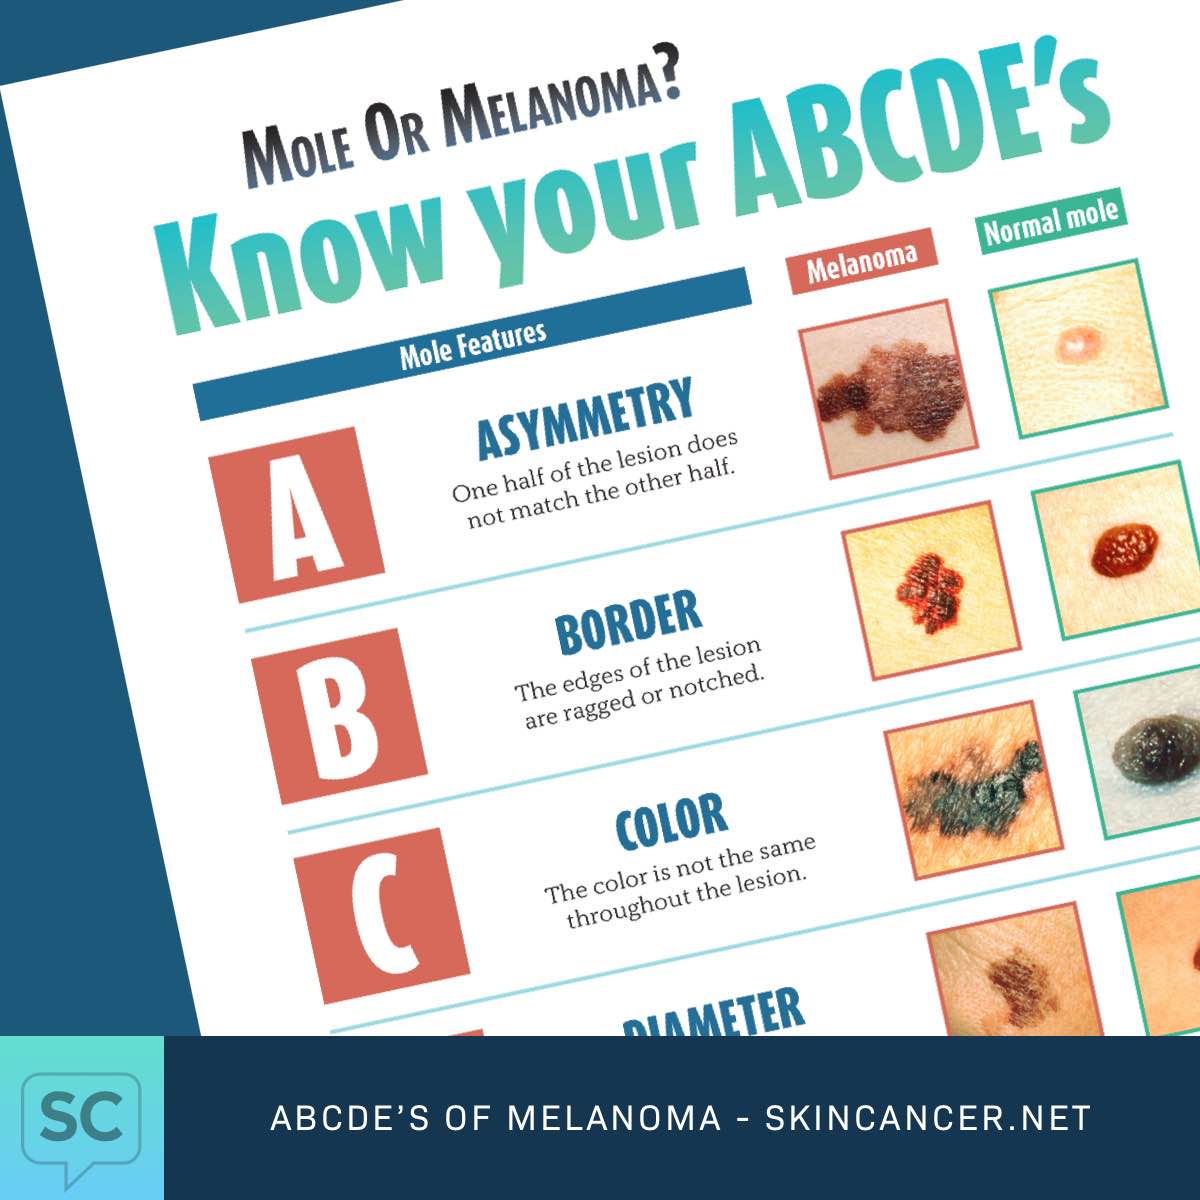 The ABCDE's of Melanoma Chart.